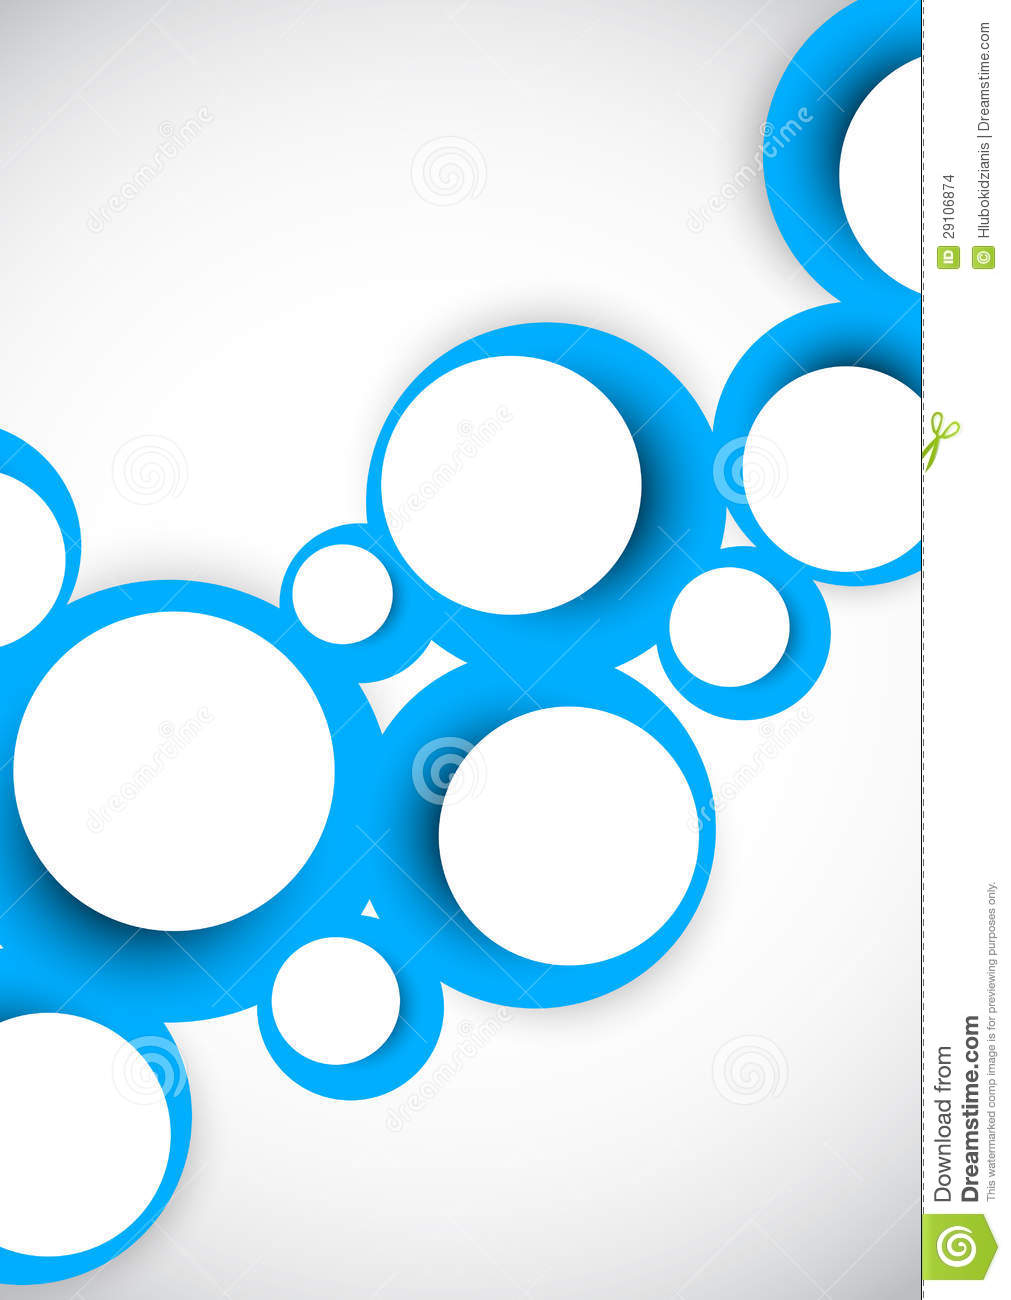 29 Circles Blue Abstract Background HD Wallpapers